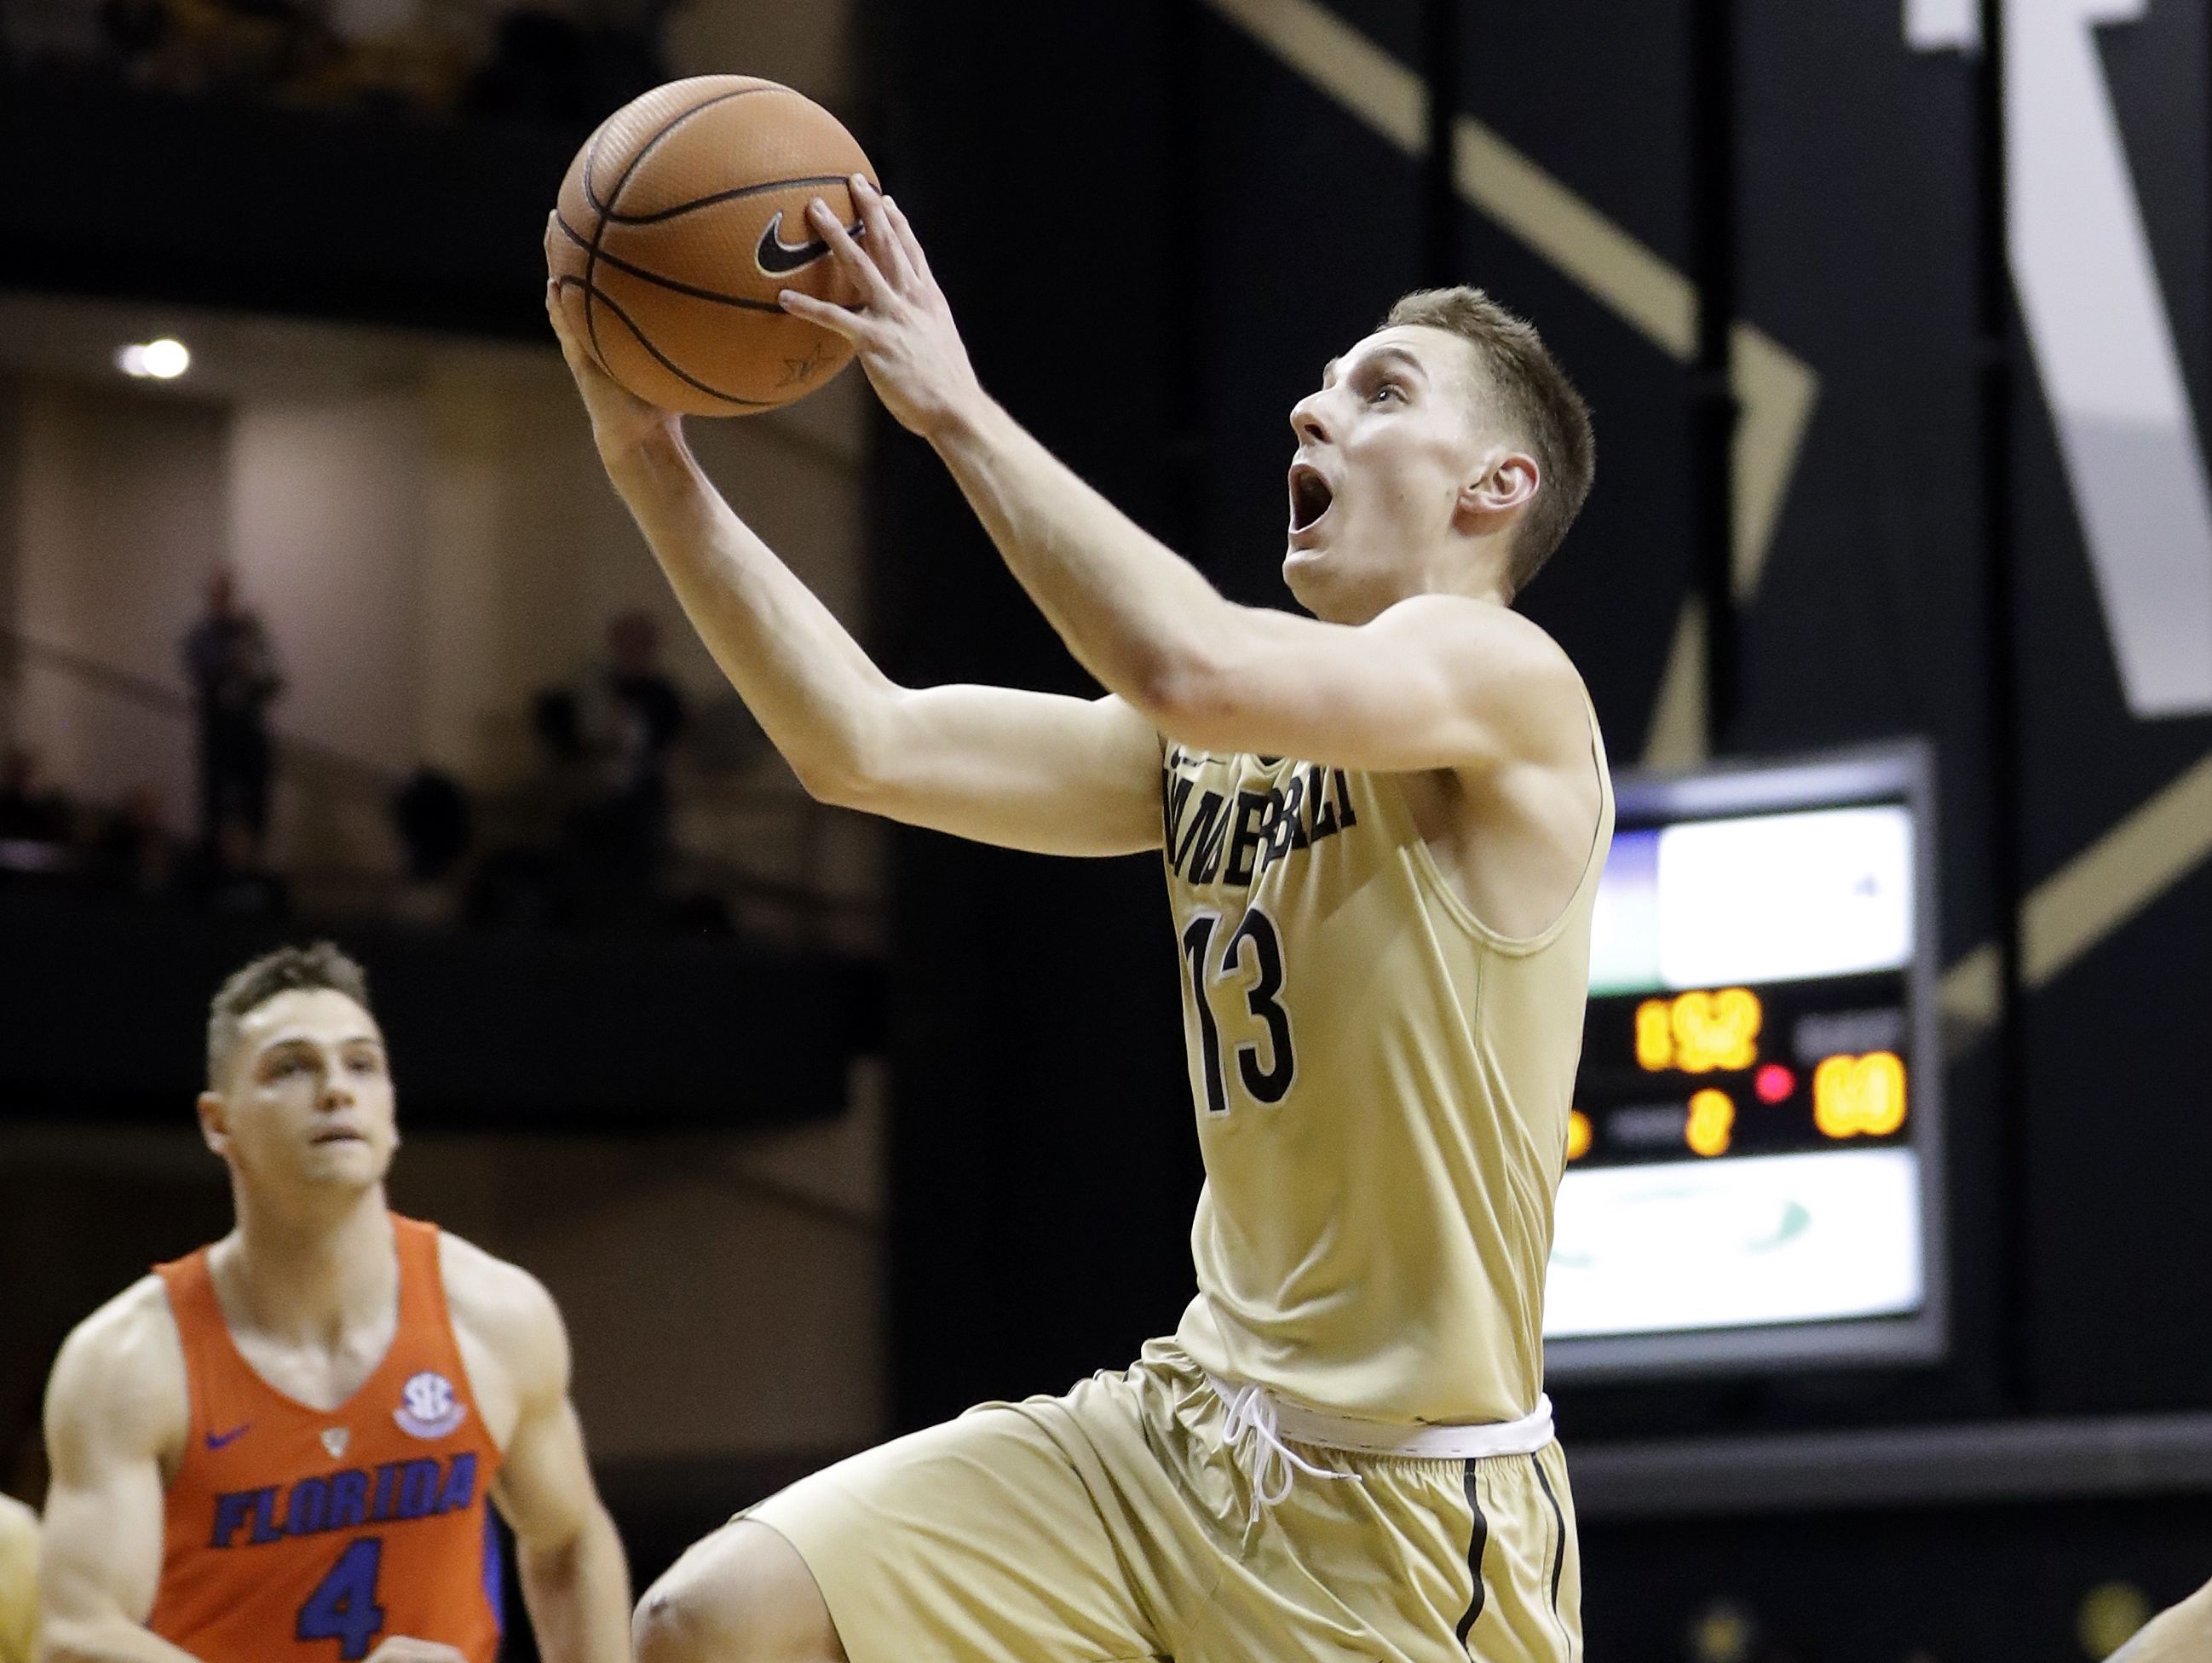 Vanderbilt basketball claims another thriller, upsets Florida for fifth